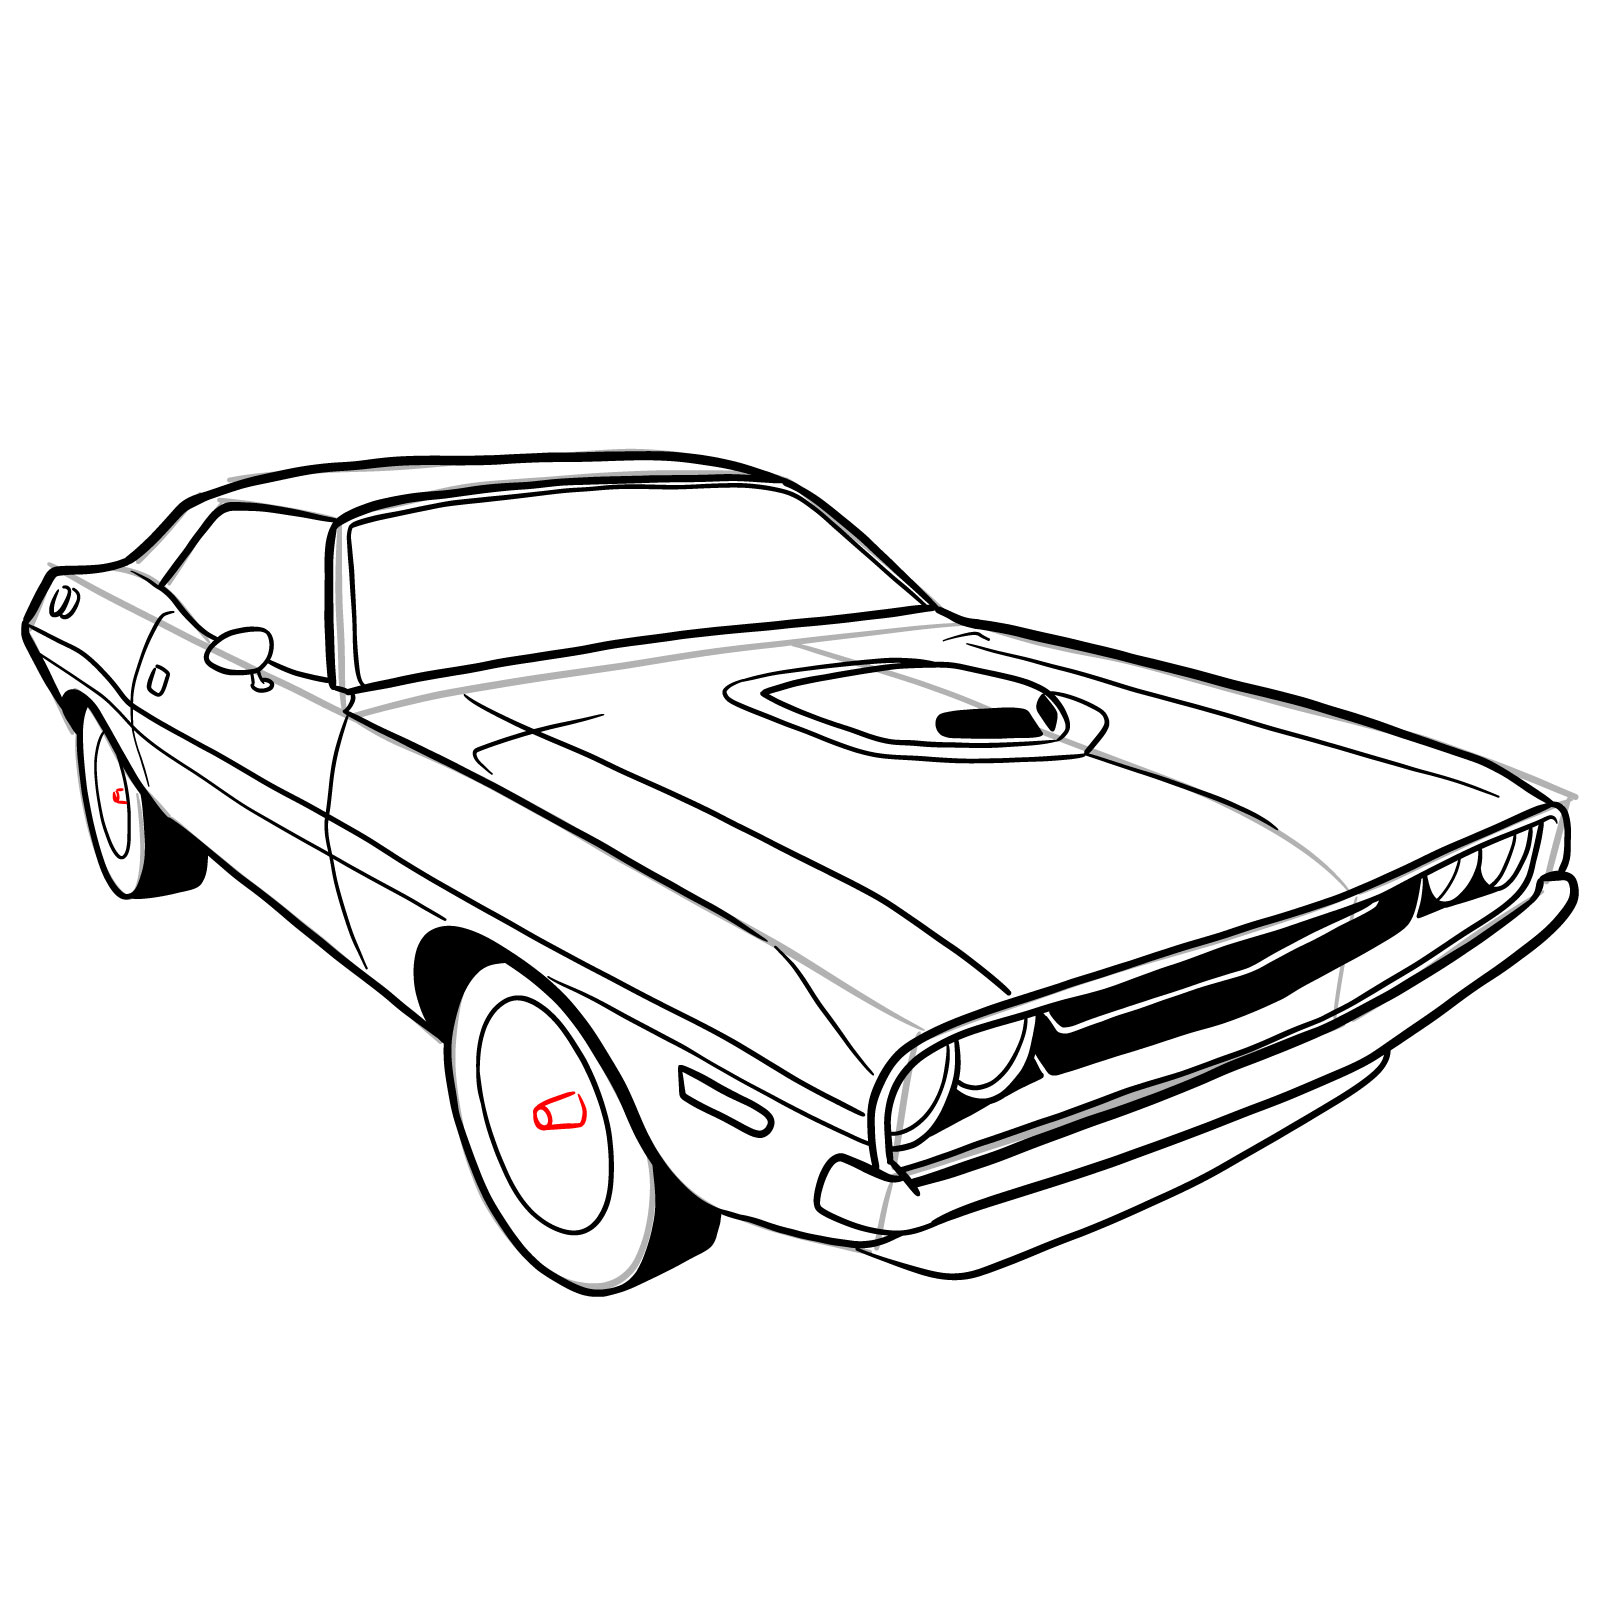 How to draw Dodge Challenger 1970 - step 32